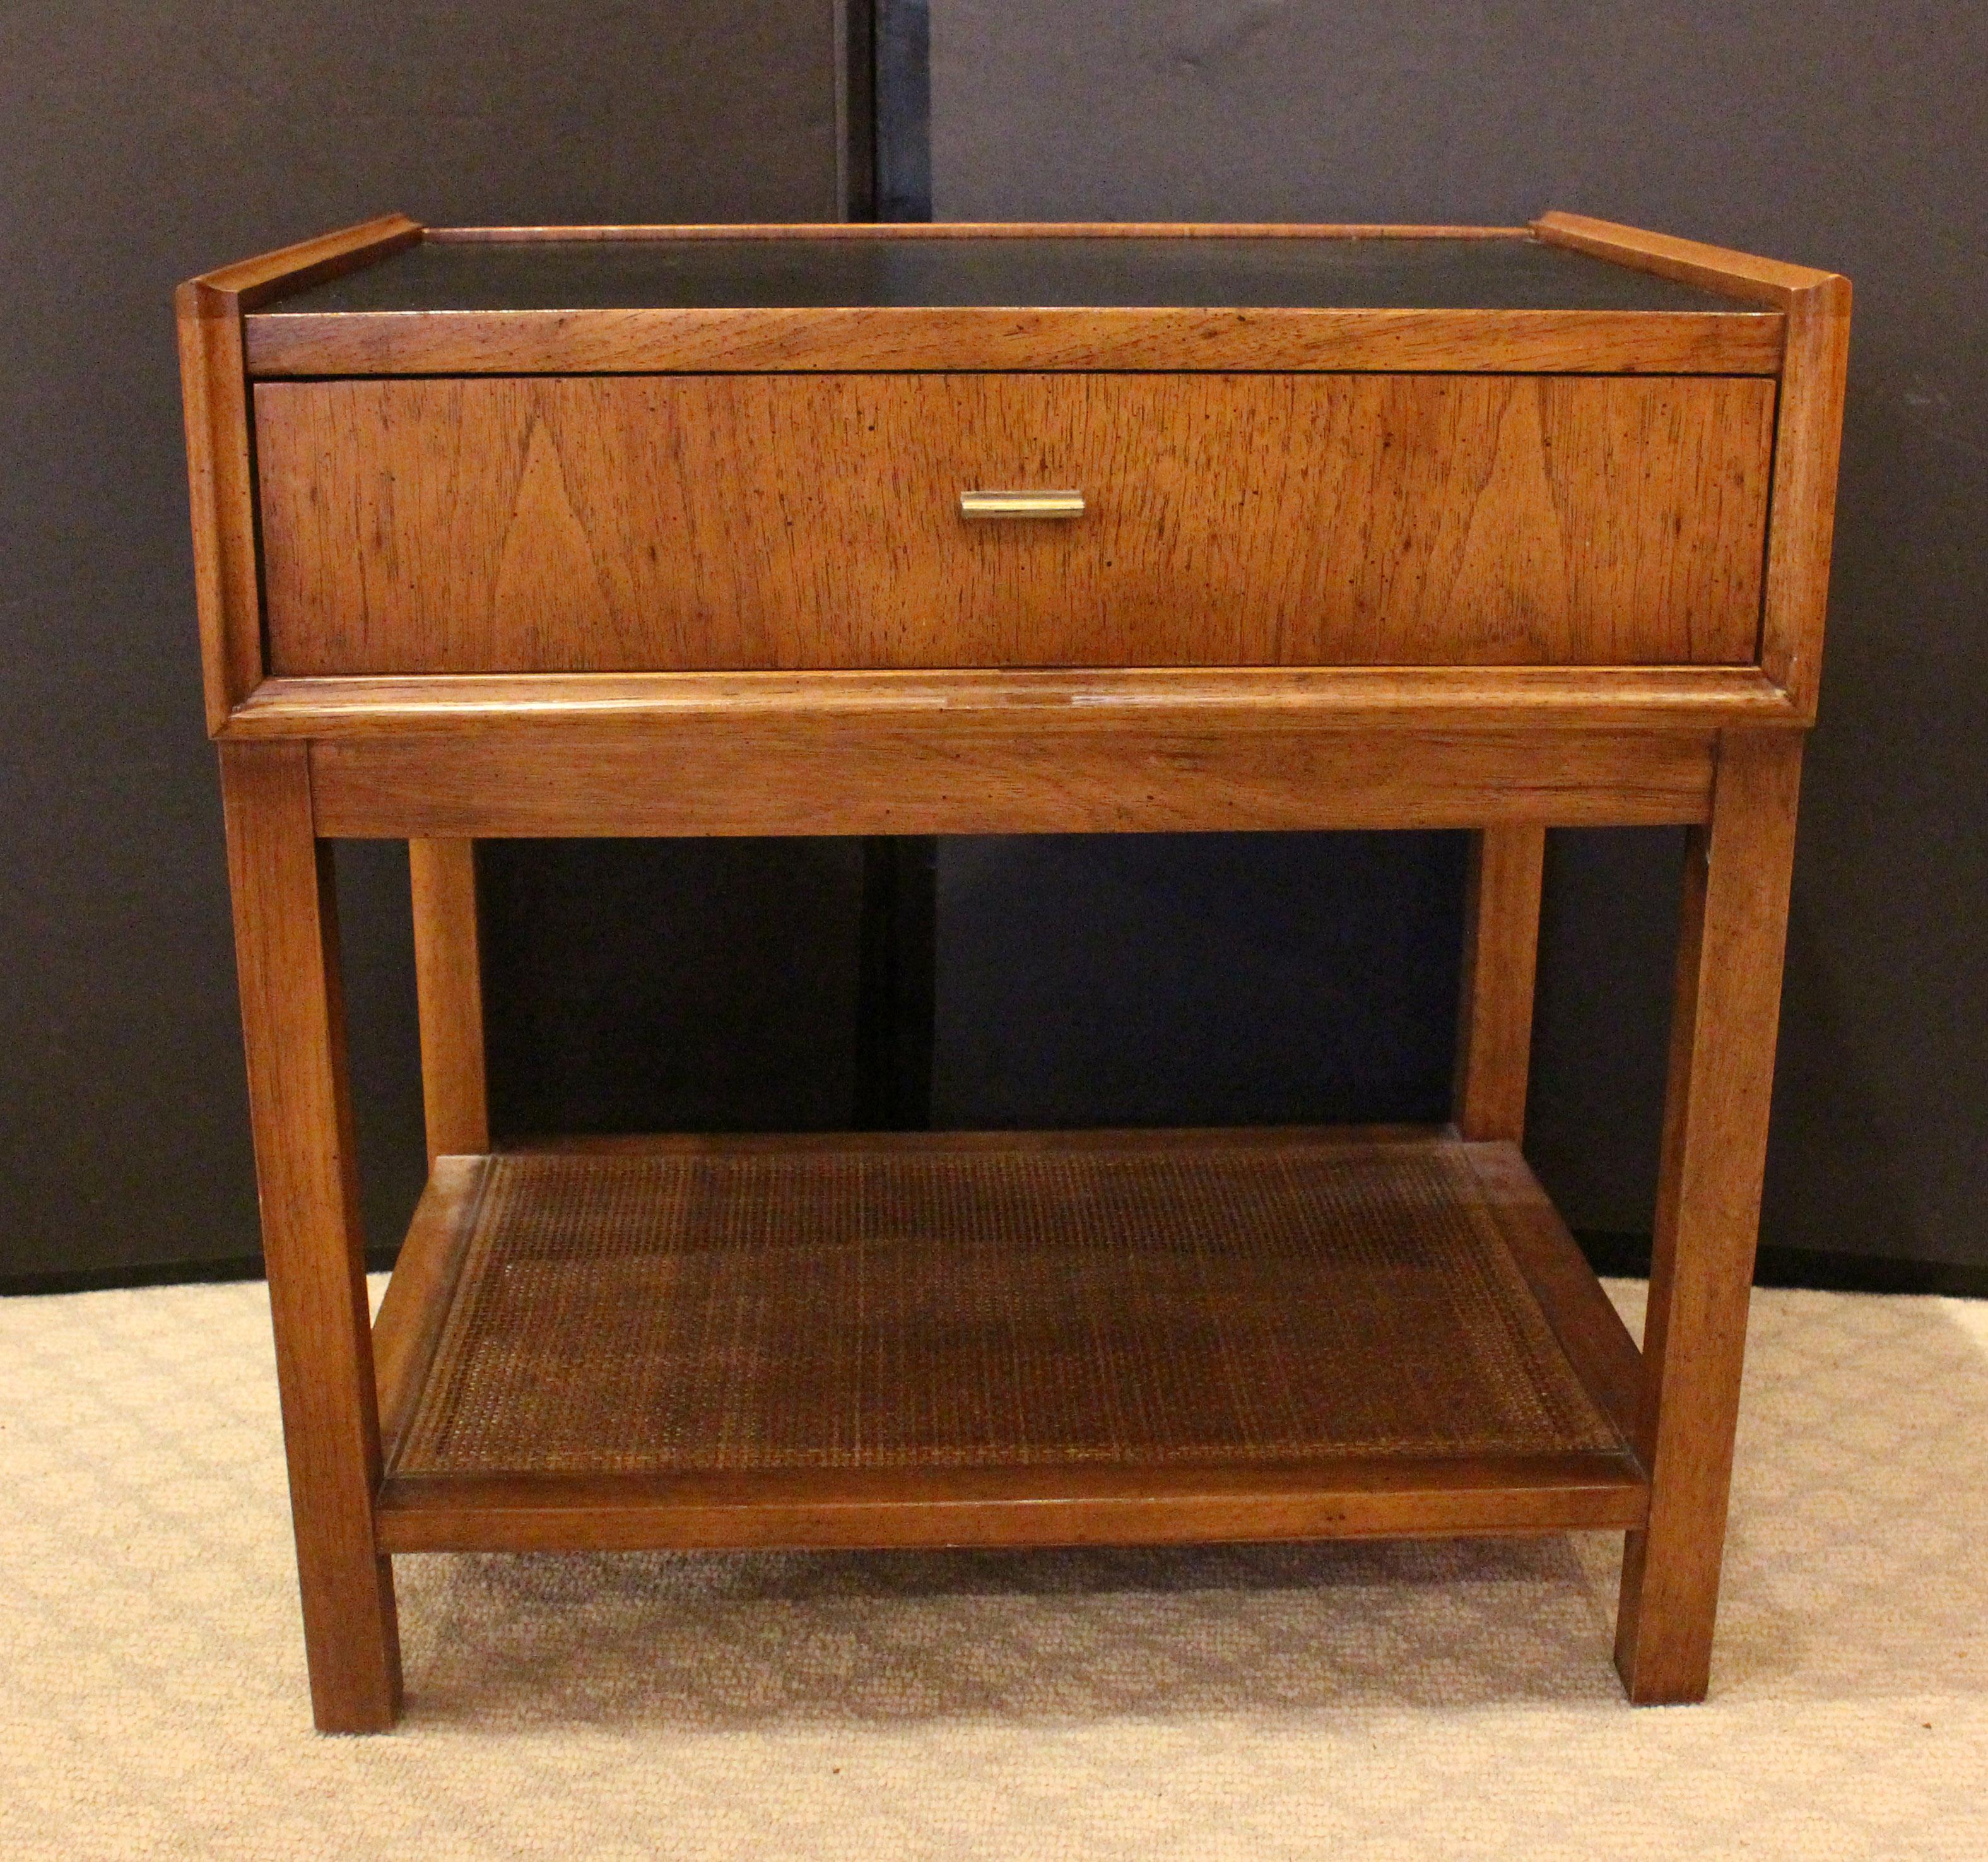 Mid Century Modern night stand made by Founders, c.1960s. Rarely found design by Jack Cartwright. Solid pecan, brass & cane shelf. Top inset with grained leather. Not signed, but identical to other branded pieces.
22